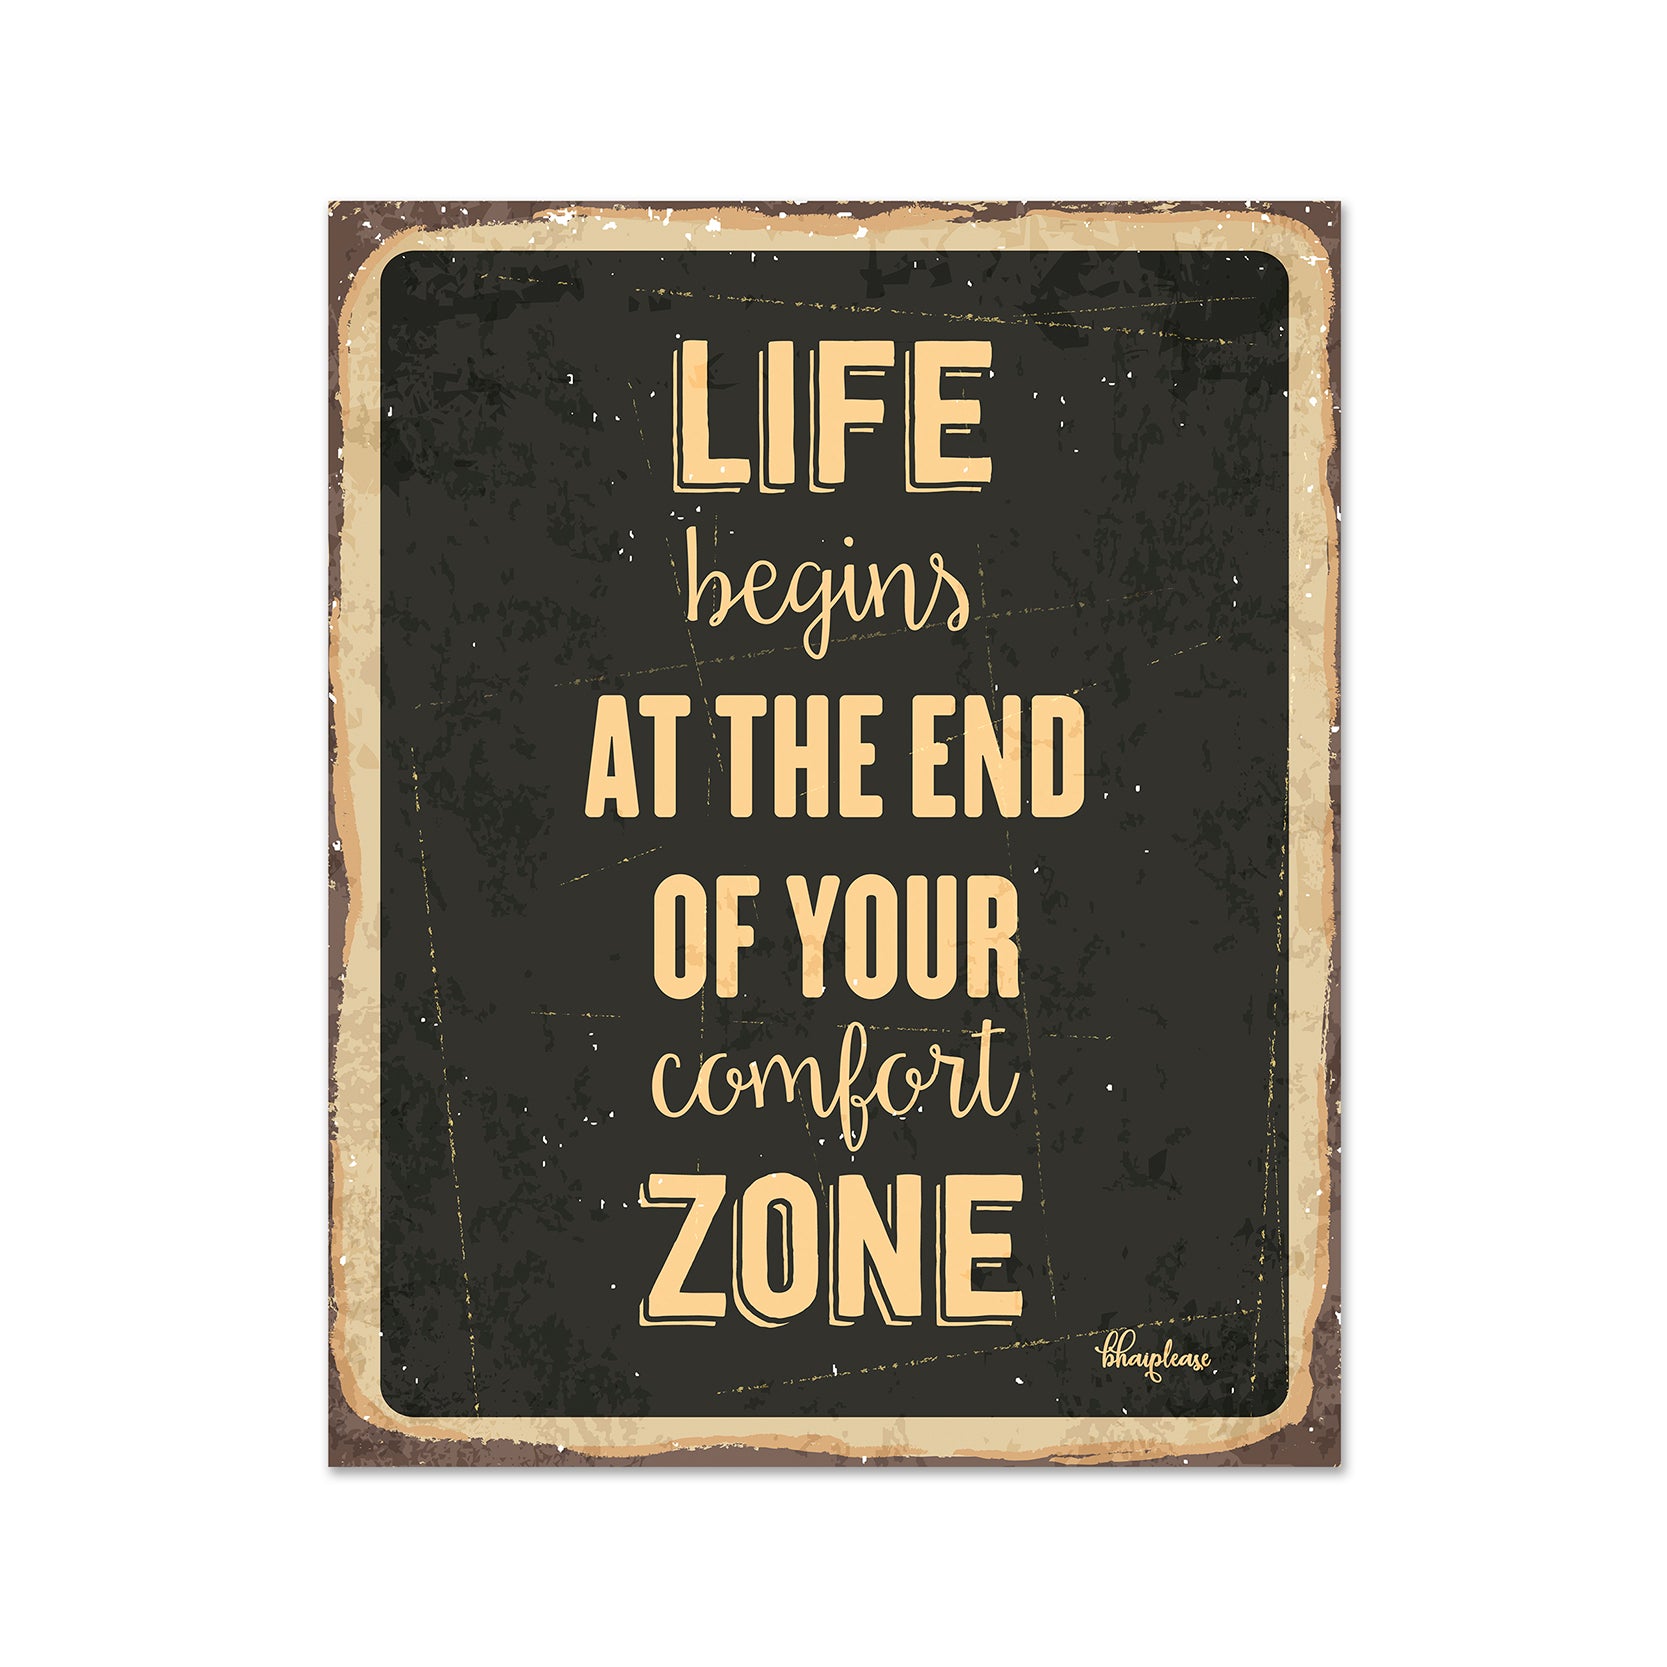 Life Begins at The end of Your Comfort Zone Wooden Fridge / Refrigerator Magnet